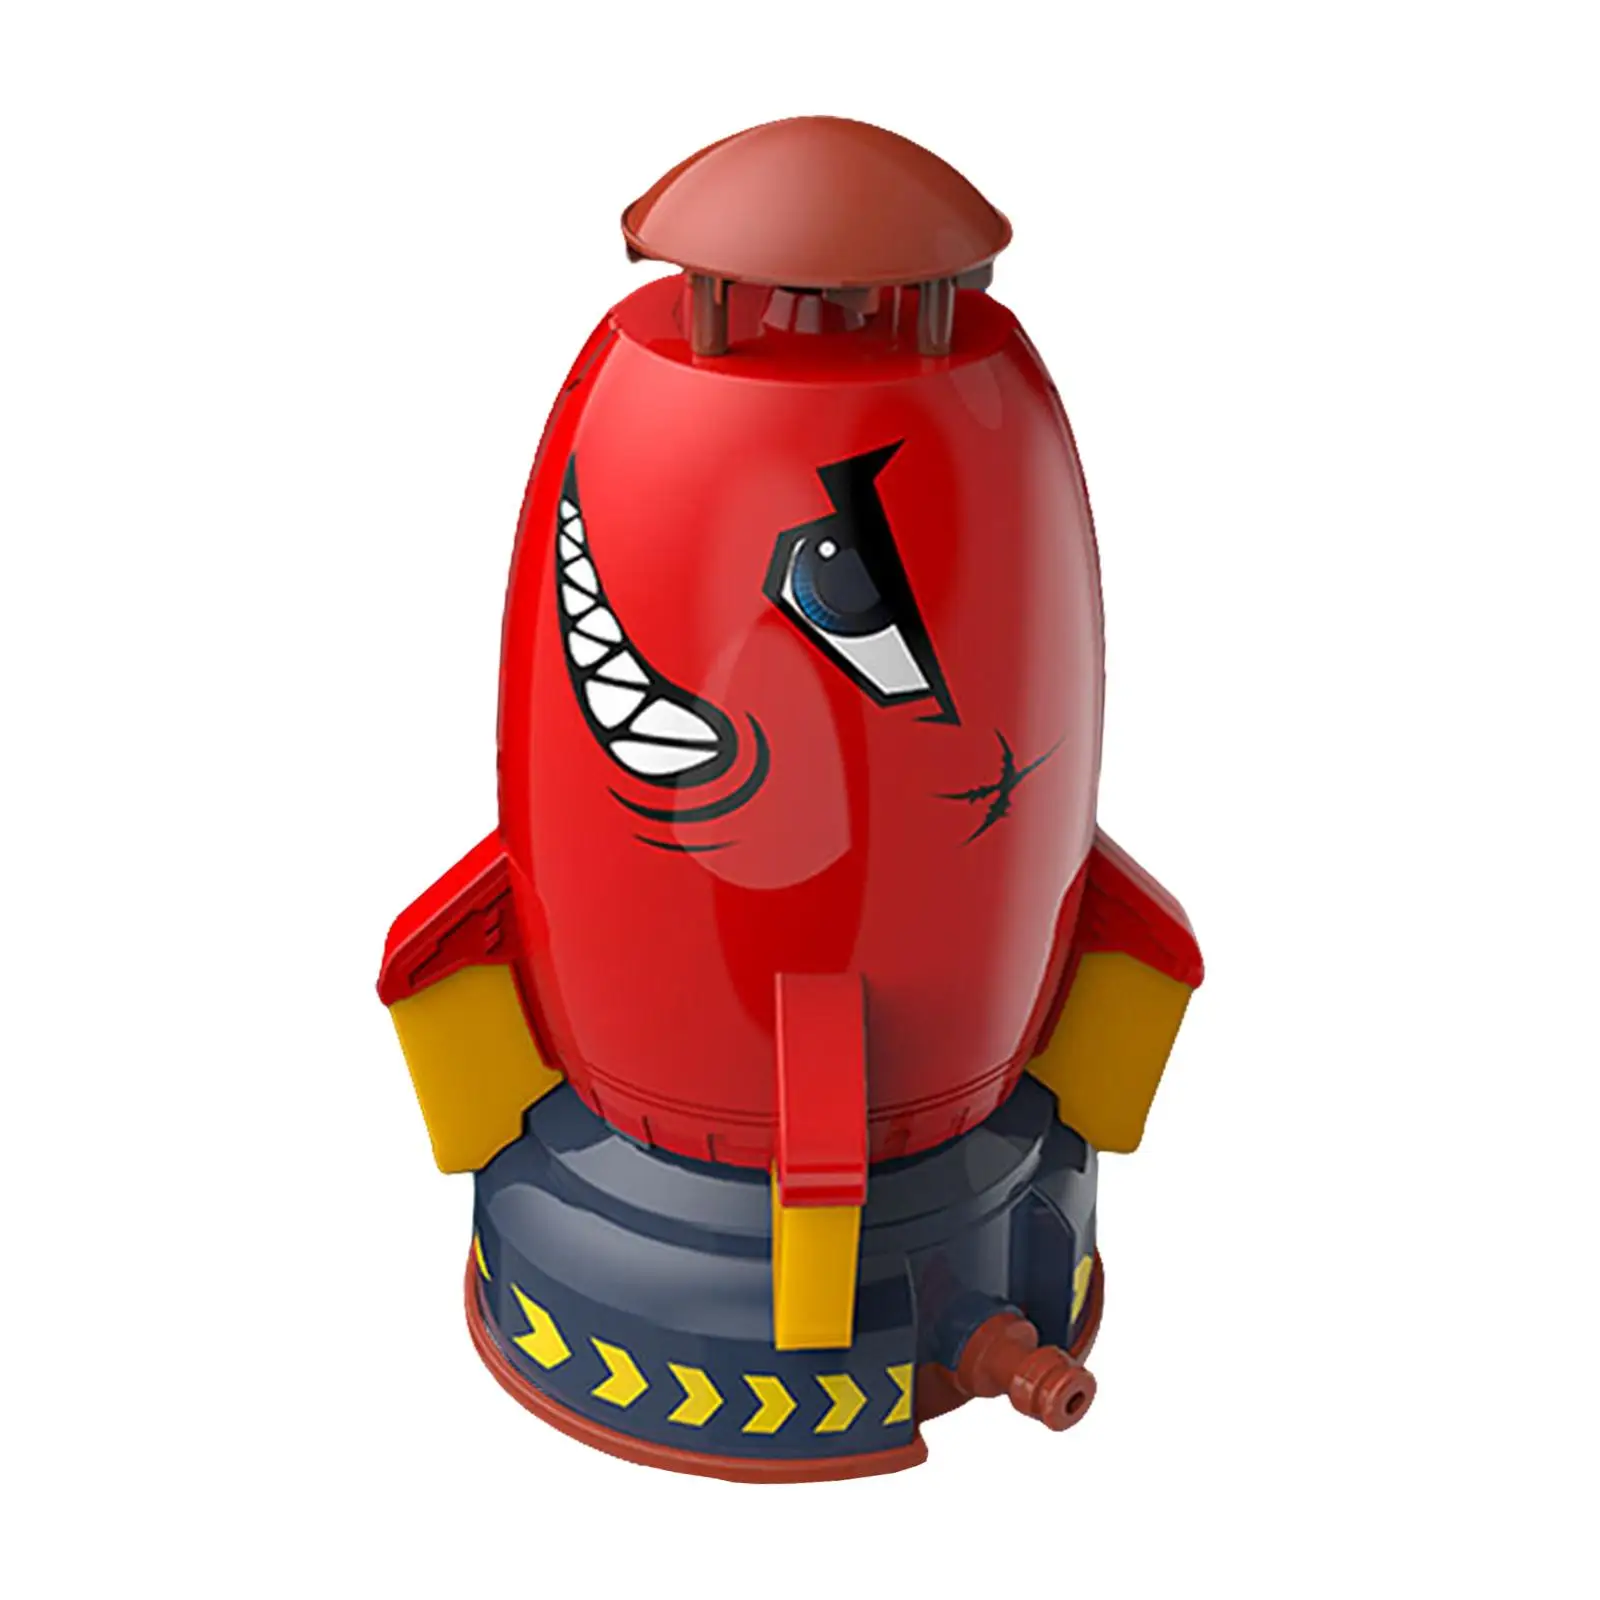 Baby Bath Toy Space Rocket Shaped Pool Toy Bathtub Toys Water Games Outdoor Rocket Water Pressure Lift Sprinkler for Boys Baby